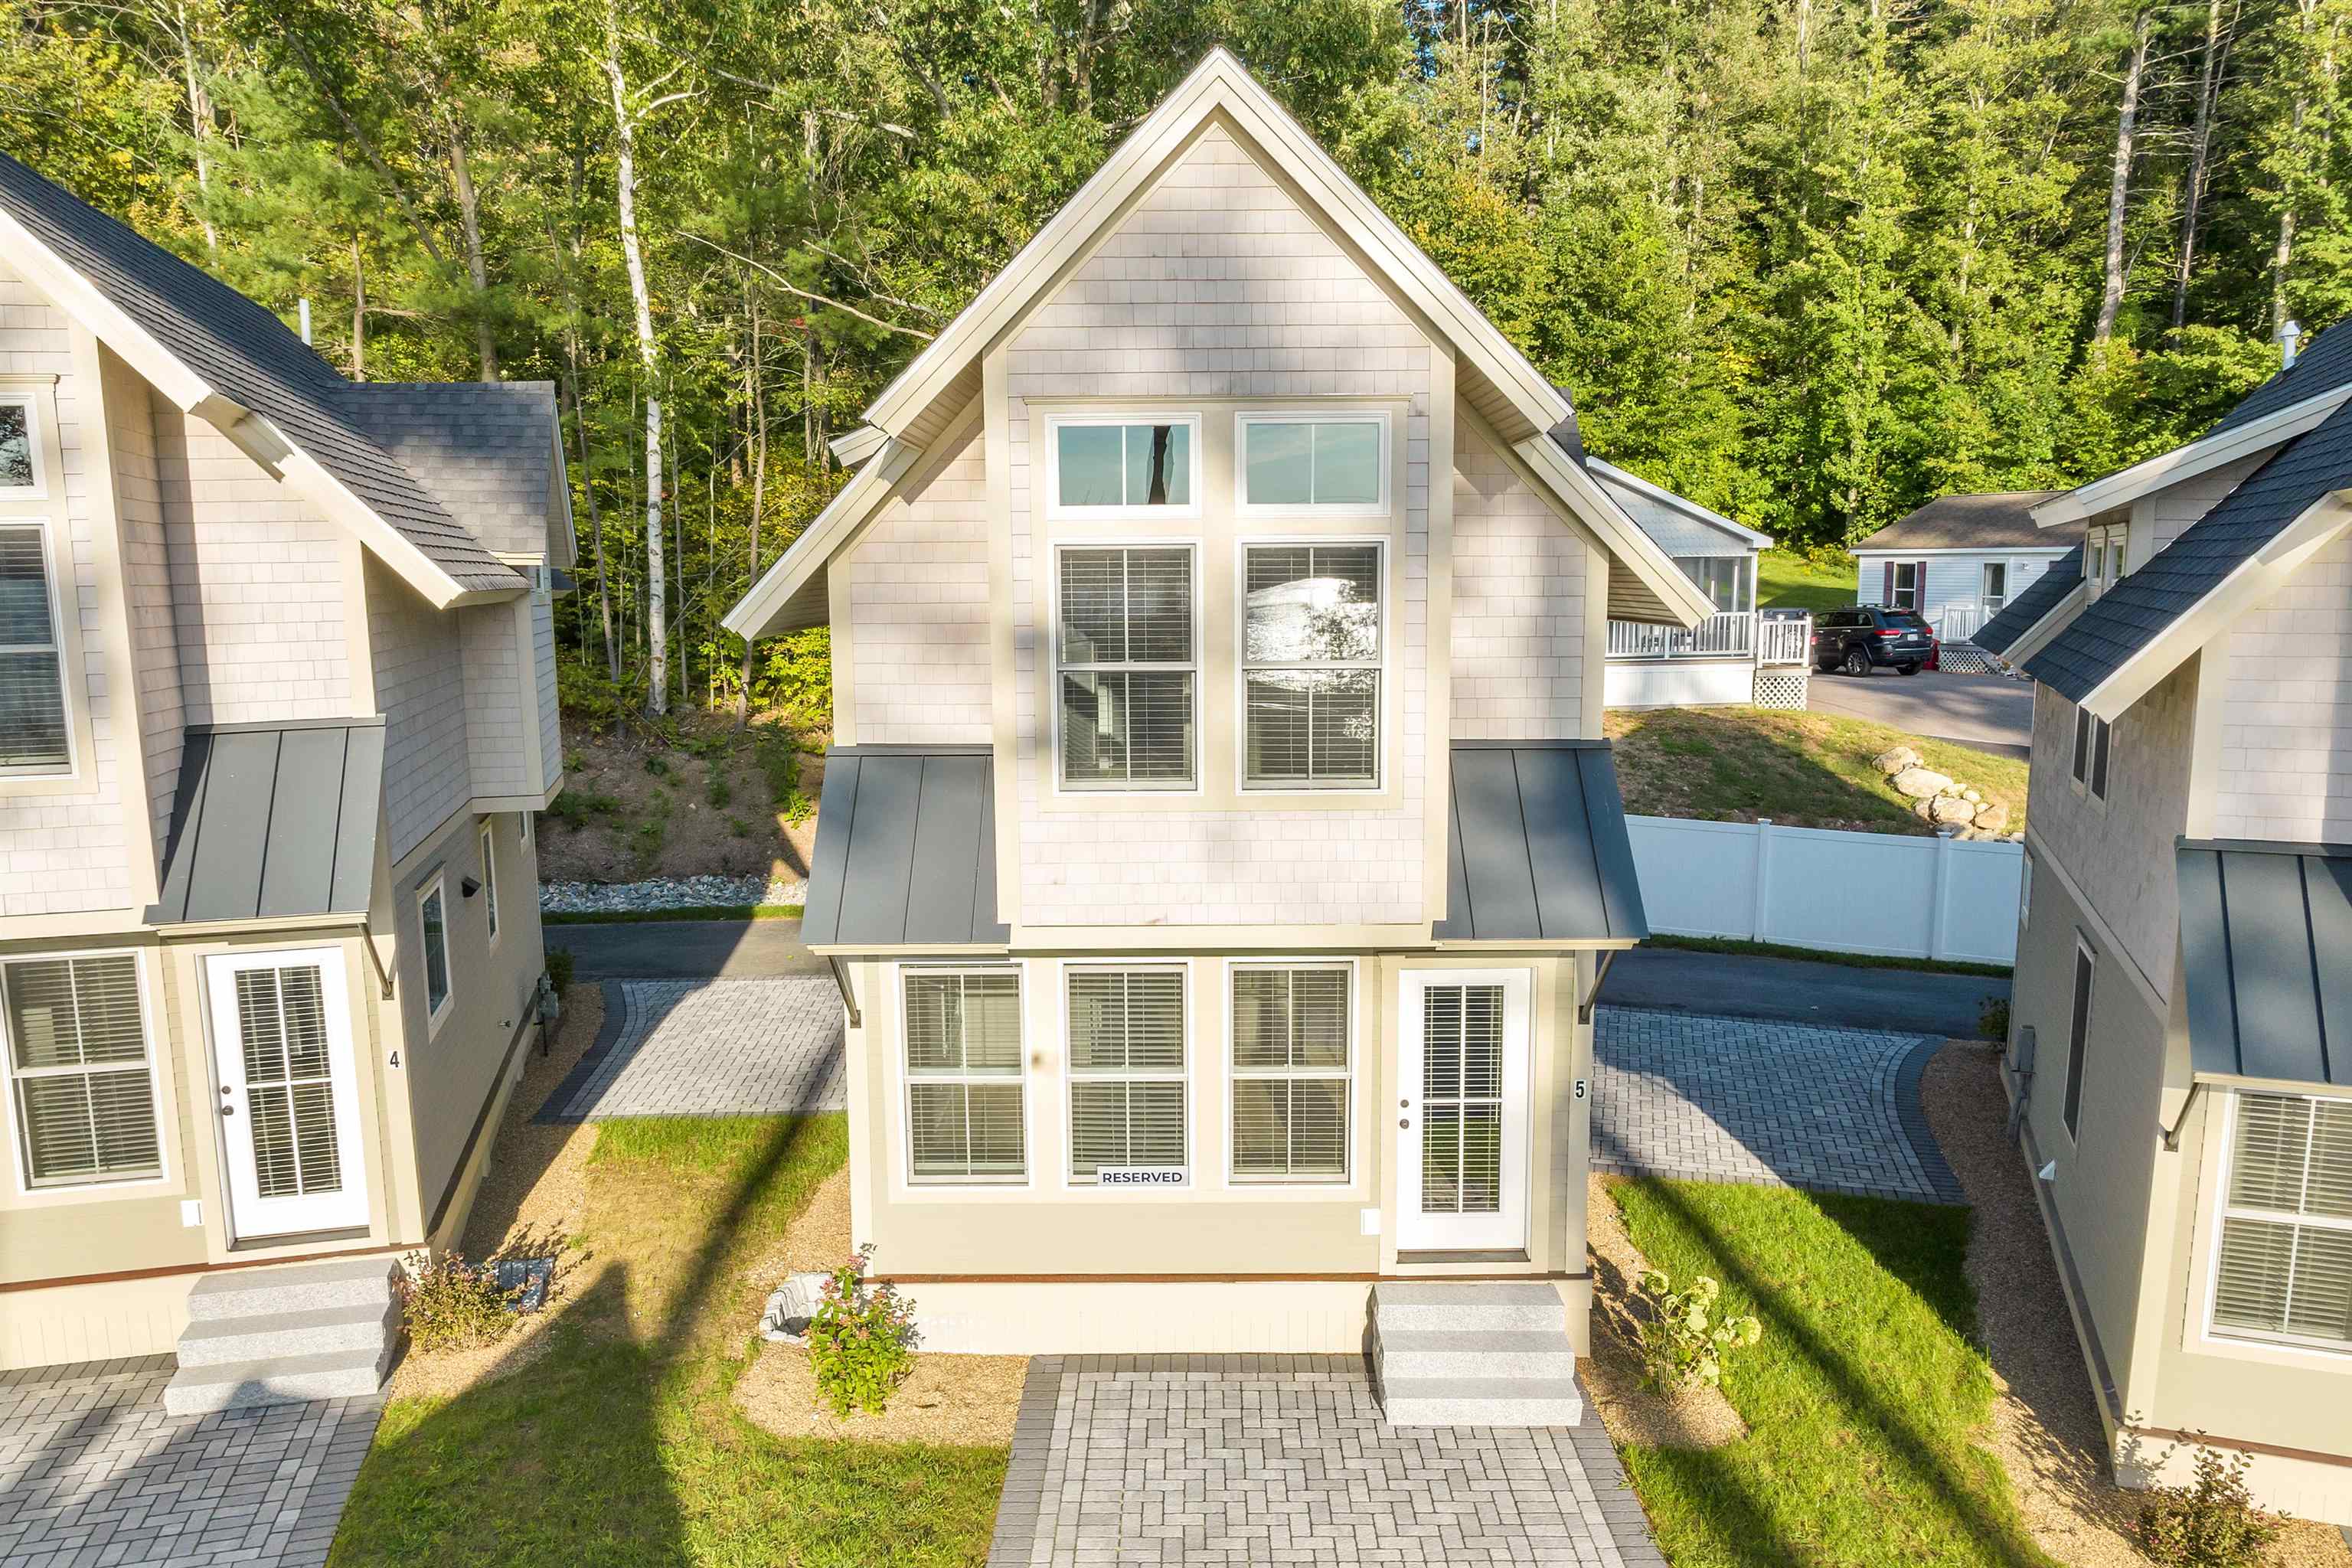 109 Weirs Boulevard5  Laconia, NH Photo